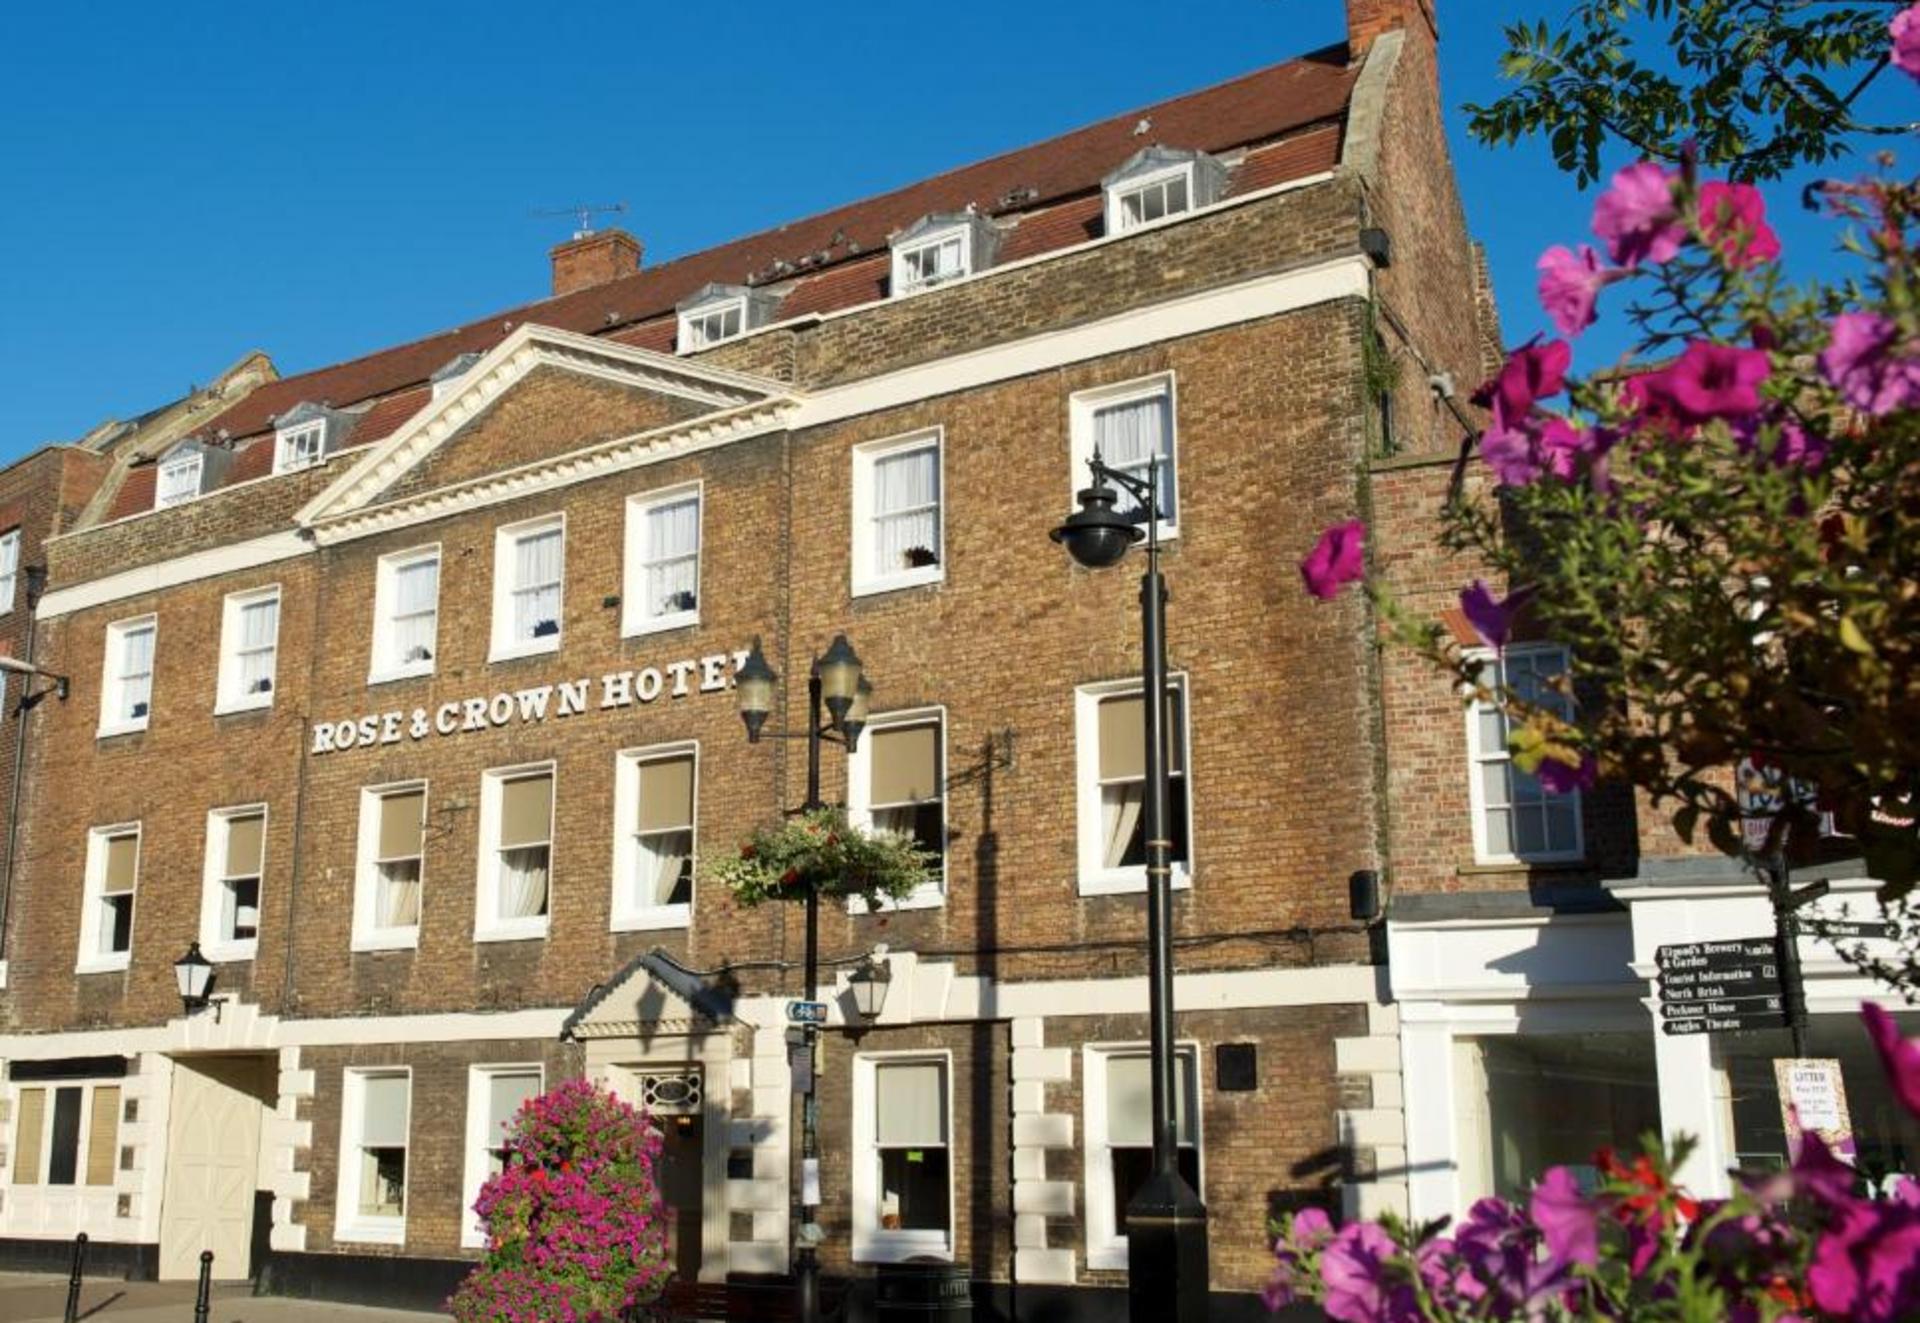 Wisbech hotel hits the market for &pound;1.2m